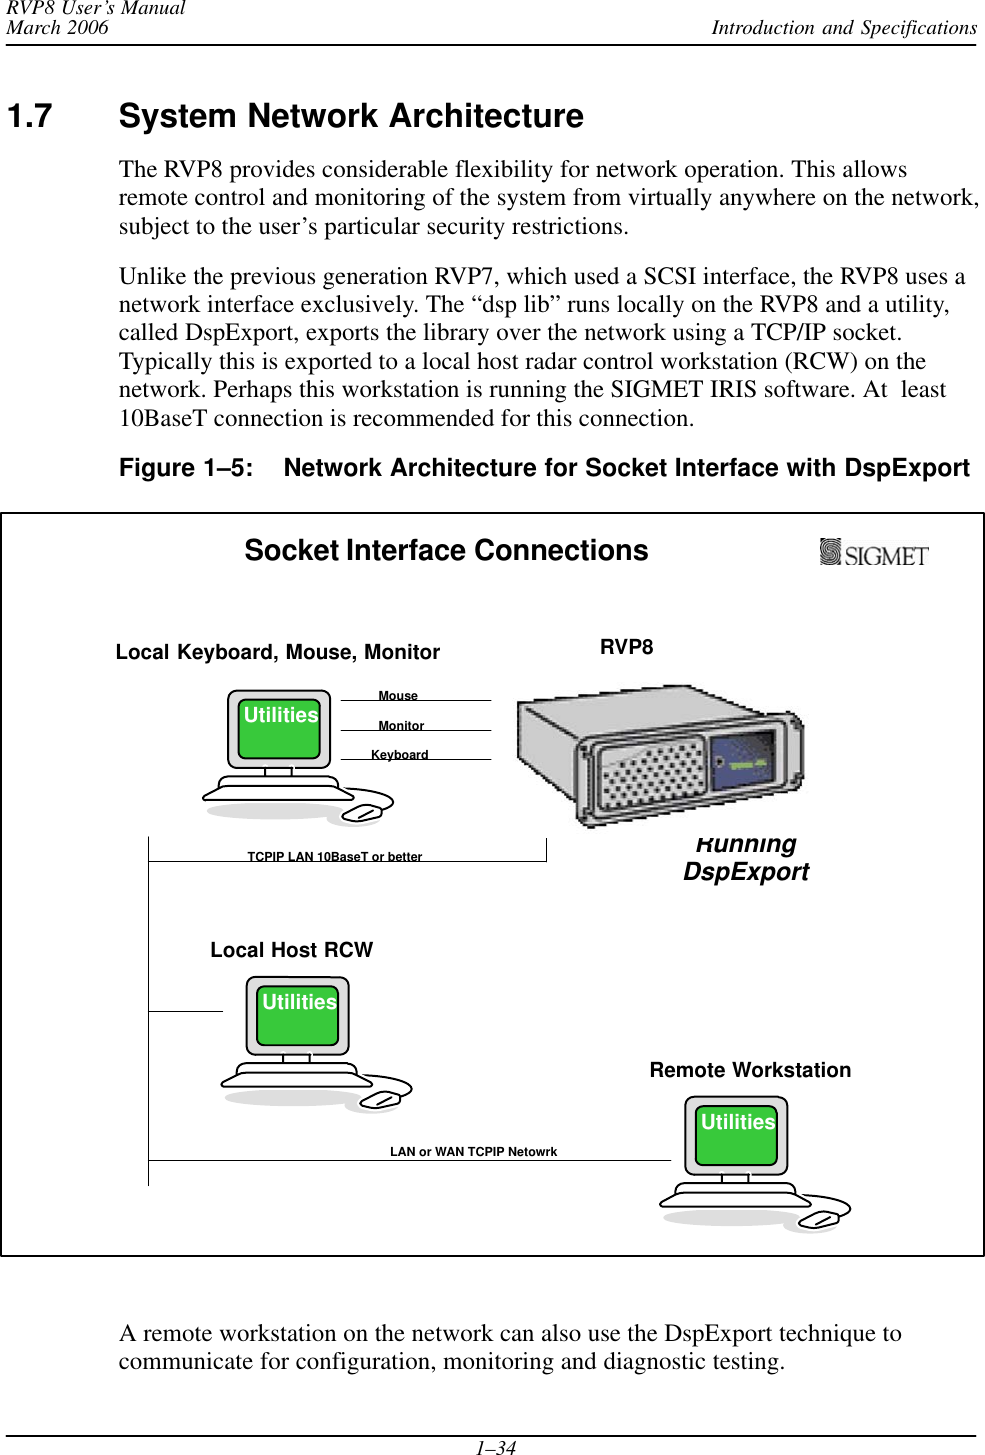 Introduction and SpecificationsRVP8 User’s ManualMarch 20061–341.7 System Network ArchitectureThe RVP8 provides considerable flexibility for network operation. This allowsremote control and monitoring of the system from virtually anywhere on the network,subject to the user’s particular security restrictions.Unlike the previous generation RVP7, which used a SCSI interface, the RVP8 uses anetwork interface exclusively. The “dsp lib” runs locally on the RVP8 and a utility,called DspExport, exports the library over the network using a TCP/IP socket.Typically this is exported to a local host radar control workstation (RCW) on thenetwork. Perhaps this workstation is running the SIGMET IRIS software. At  least10BaseT connection is recommended for this connection.Figure 1–5: Network Architecture for Socket Interface with DspExportKeyboardMouseMonitorUtilitiesLocal Keyboard, Mouse, MonitorLocal Host RCWLAN or WAN TCPIP NetowrkRemote WorkstationSocket Interface ConnectionsRunningDspExportRVP8TCPIP LAN 10BaseT or betterUtilitiesUtilitiesA remote workstation on the network can also use the DspExport technique tocommunicate for configuration, monitoring and diagnostic testing.